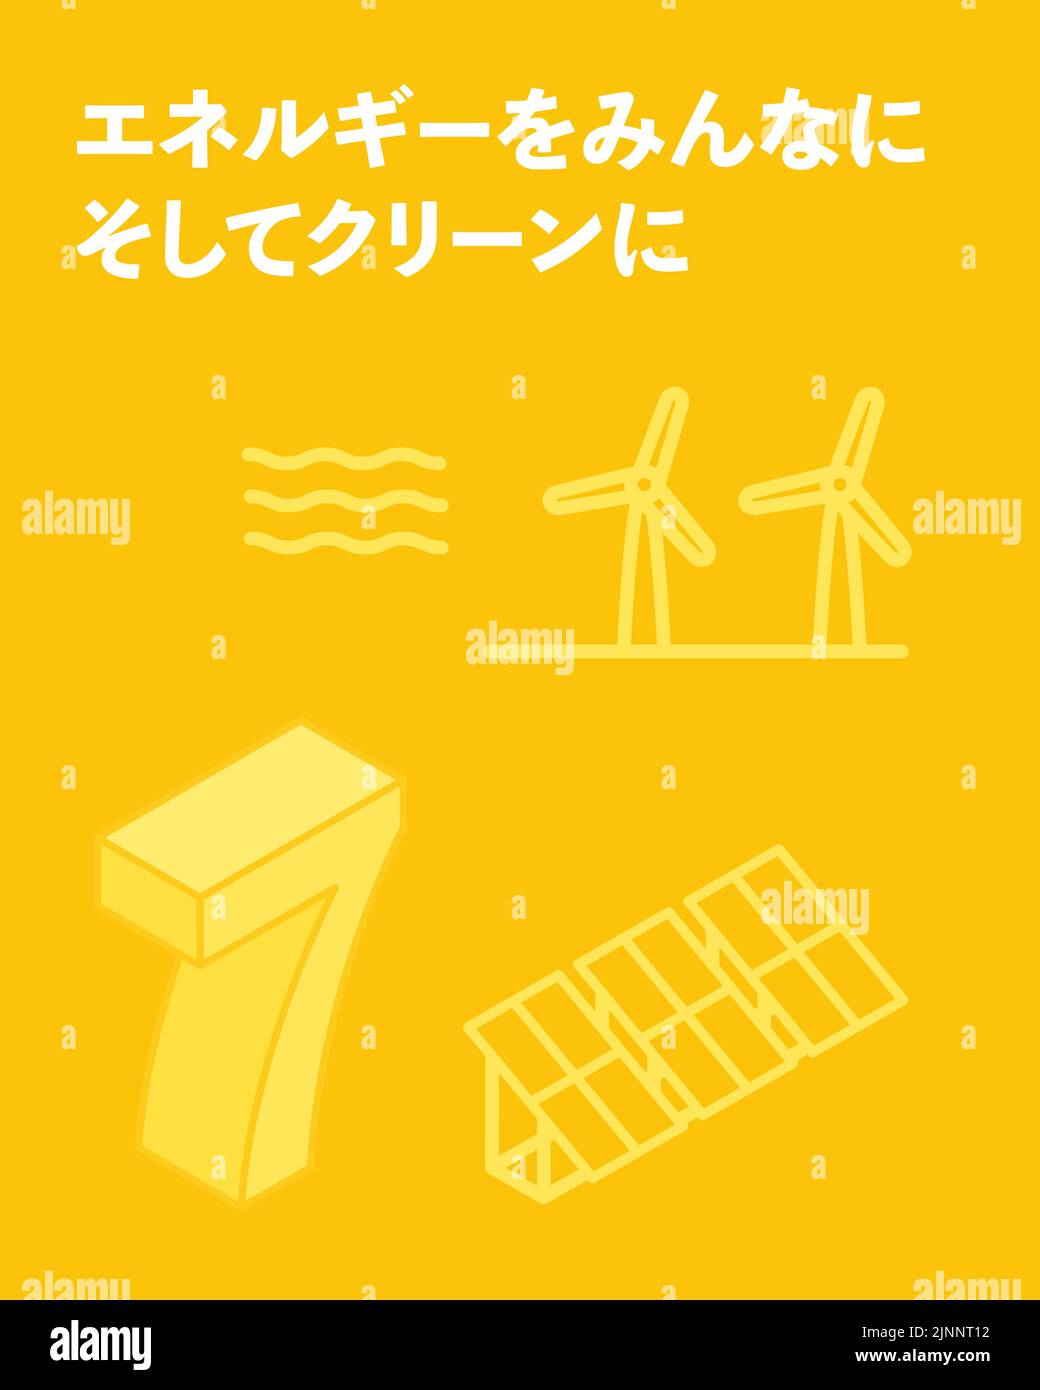 SDGs Goal 7, Affordable and clean energy - Translation: Affordable and clean energy Stock Vector